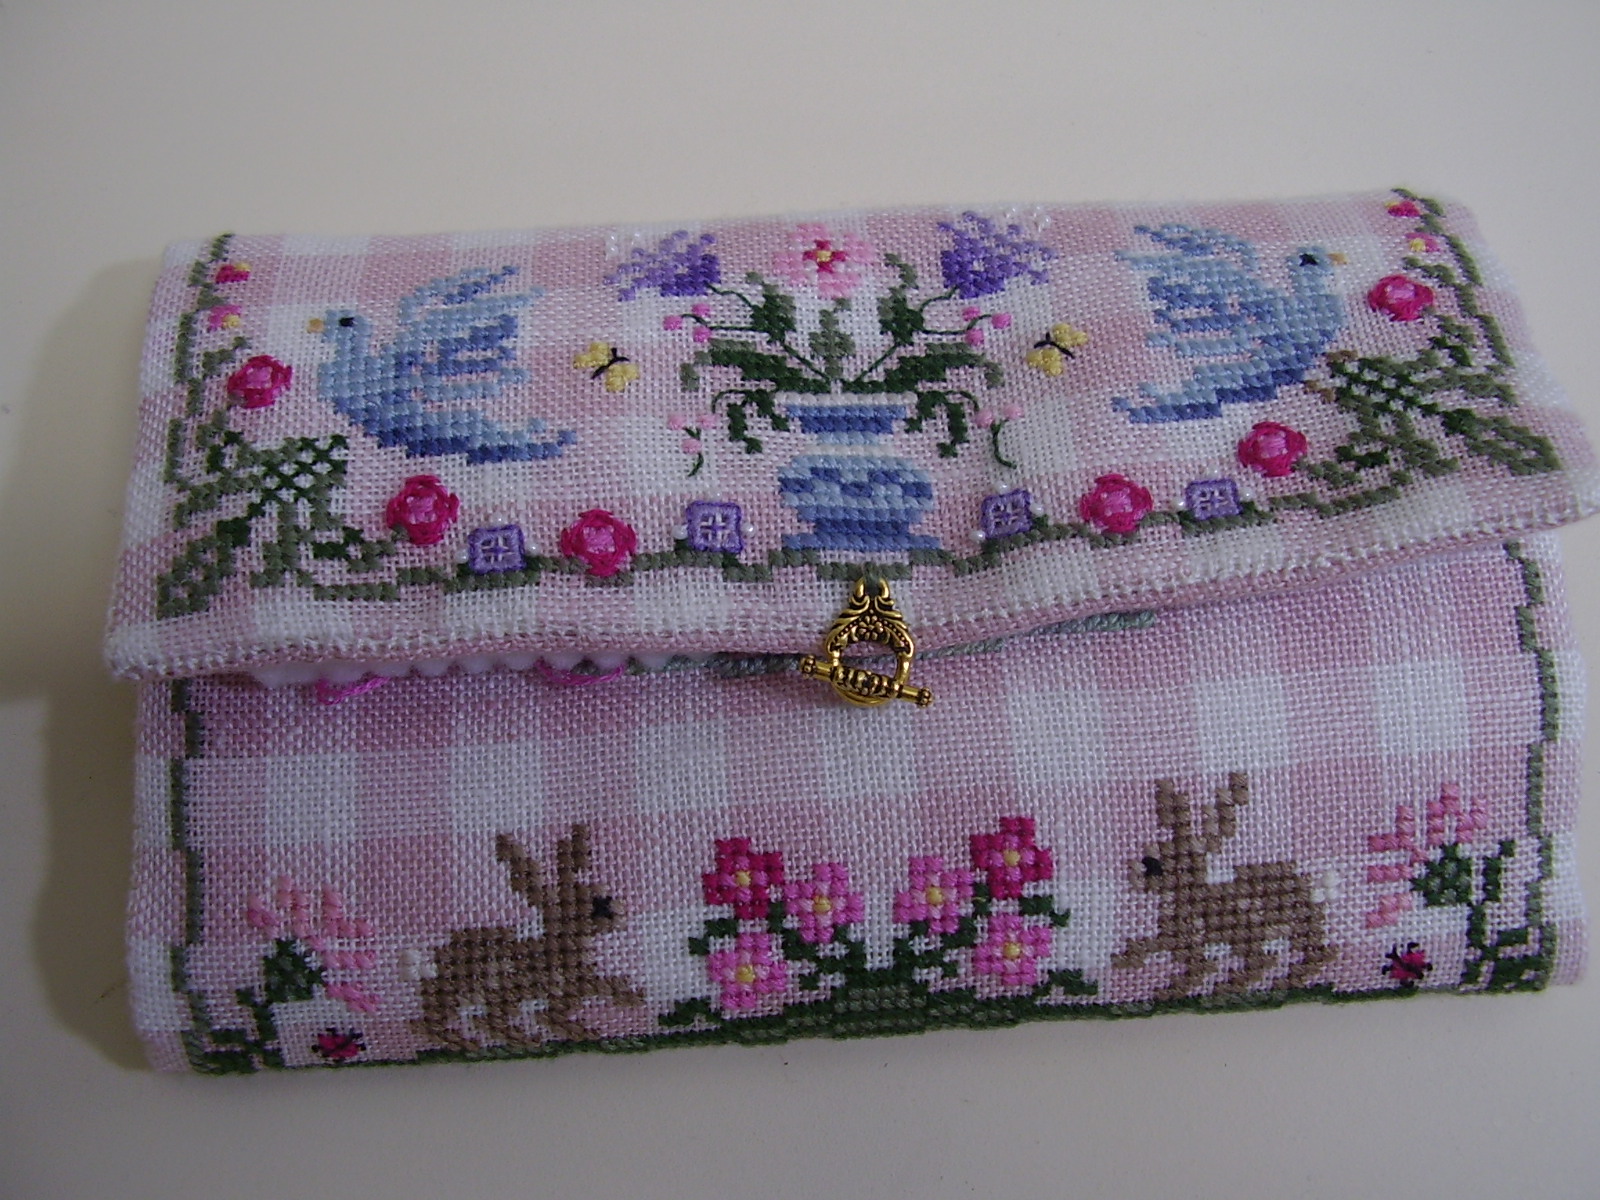 [Queen+of+the+Needle+Sampler+Sewing+Case+View+2+by+Just+Nan.JPG]